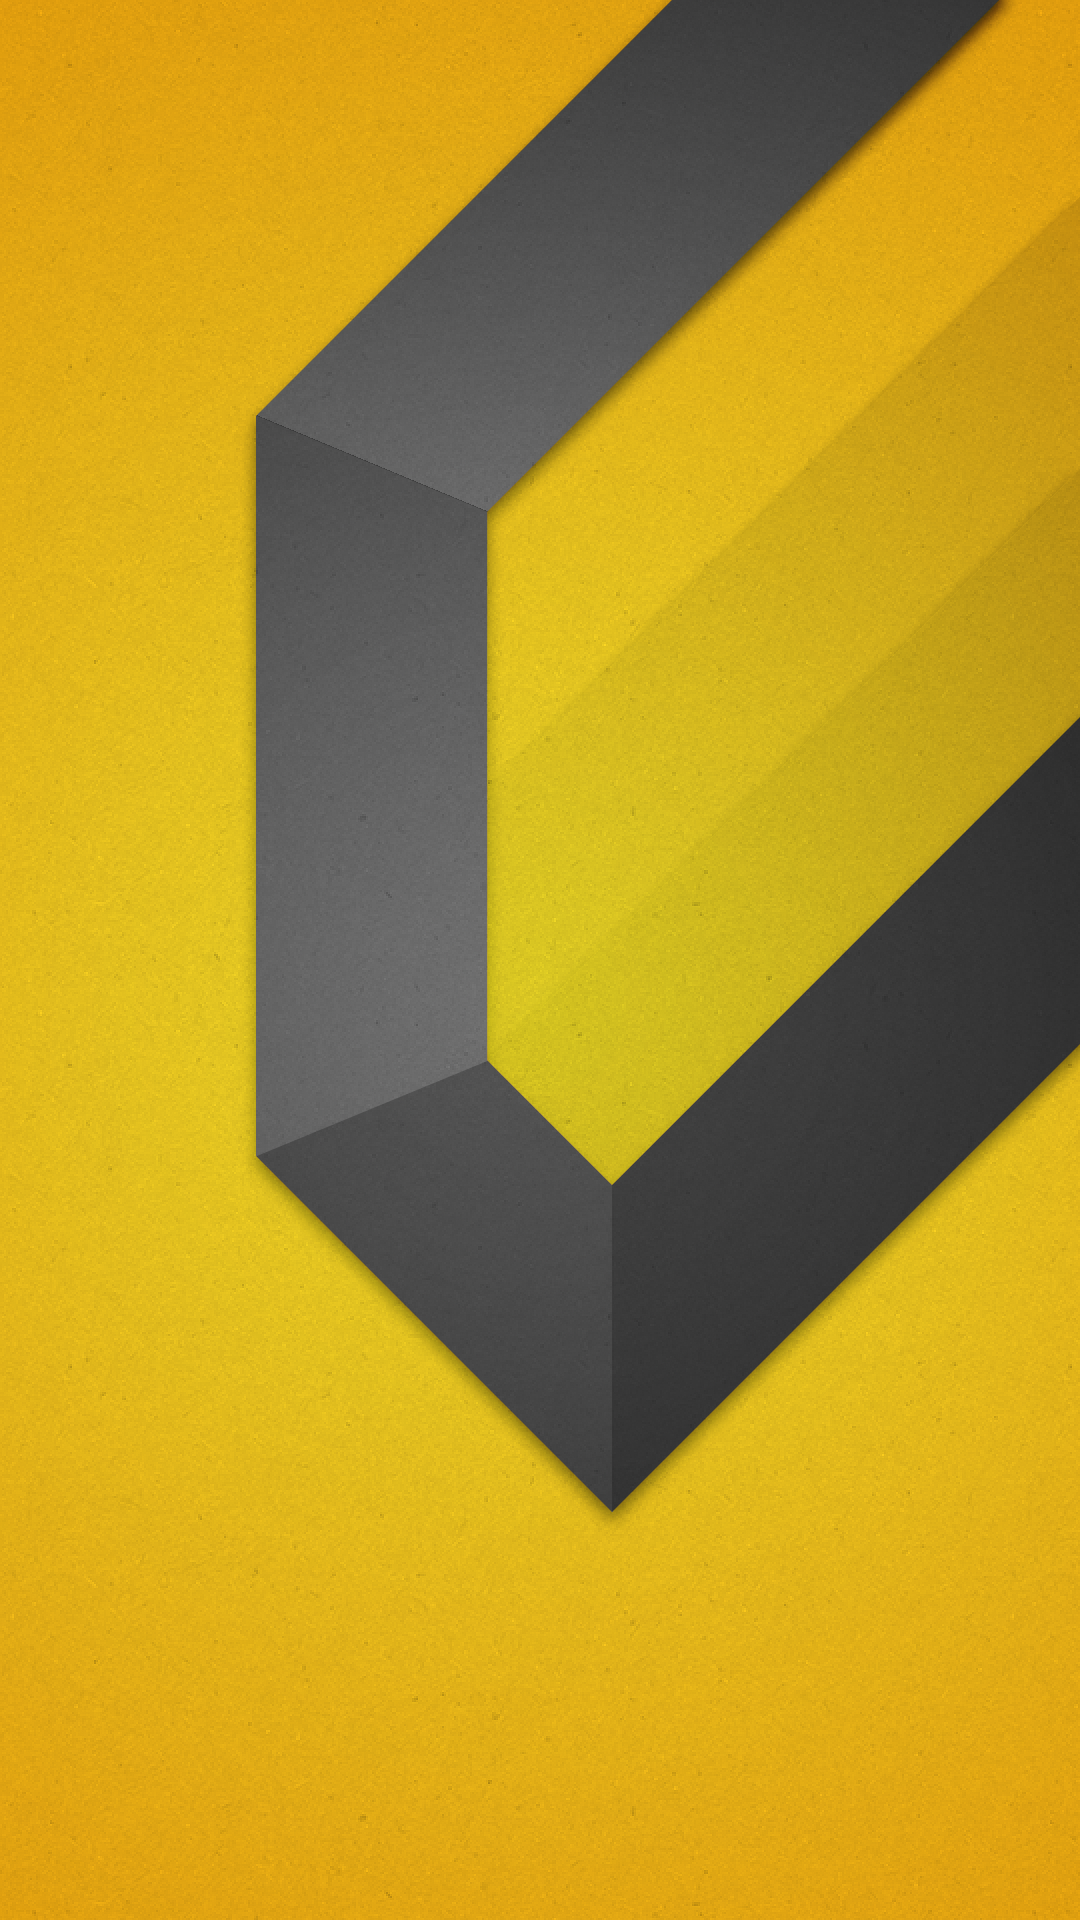 android marshmallow wallpaper 1080p,giallo,font,piazza